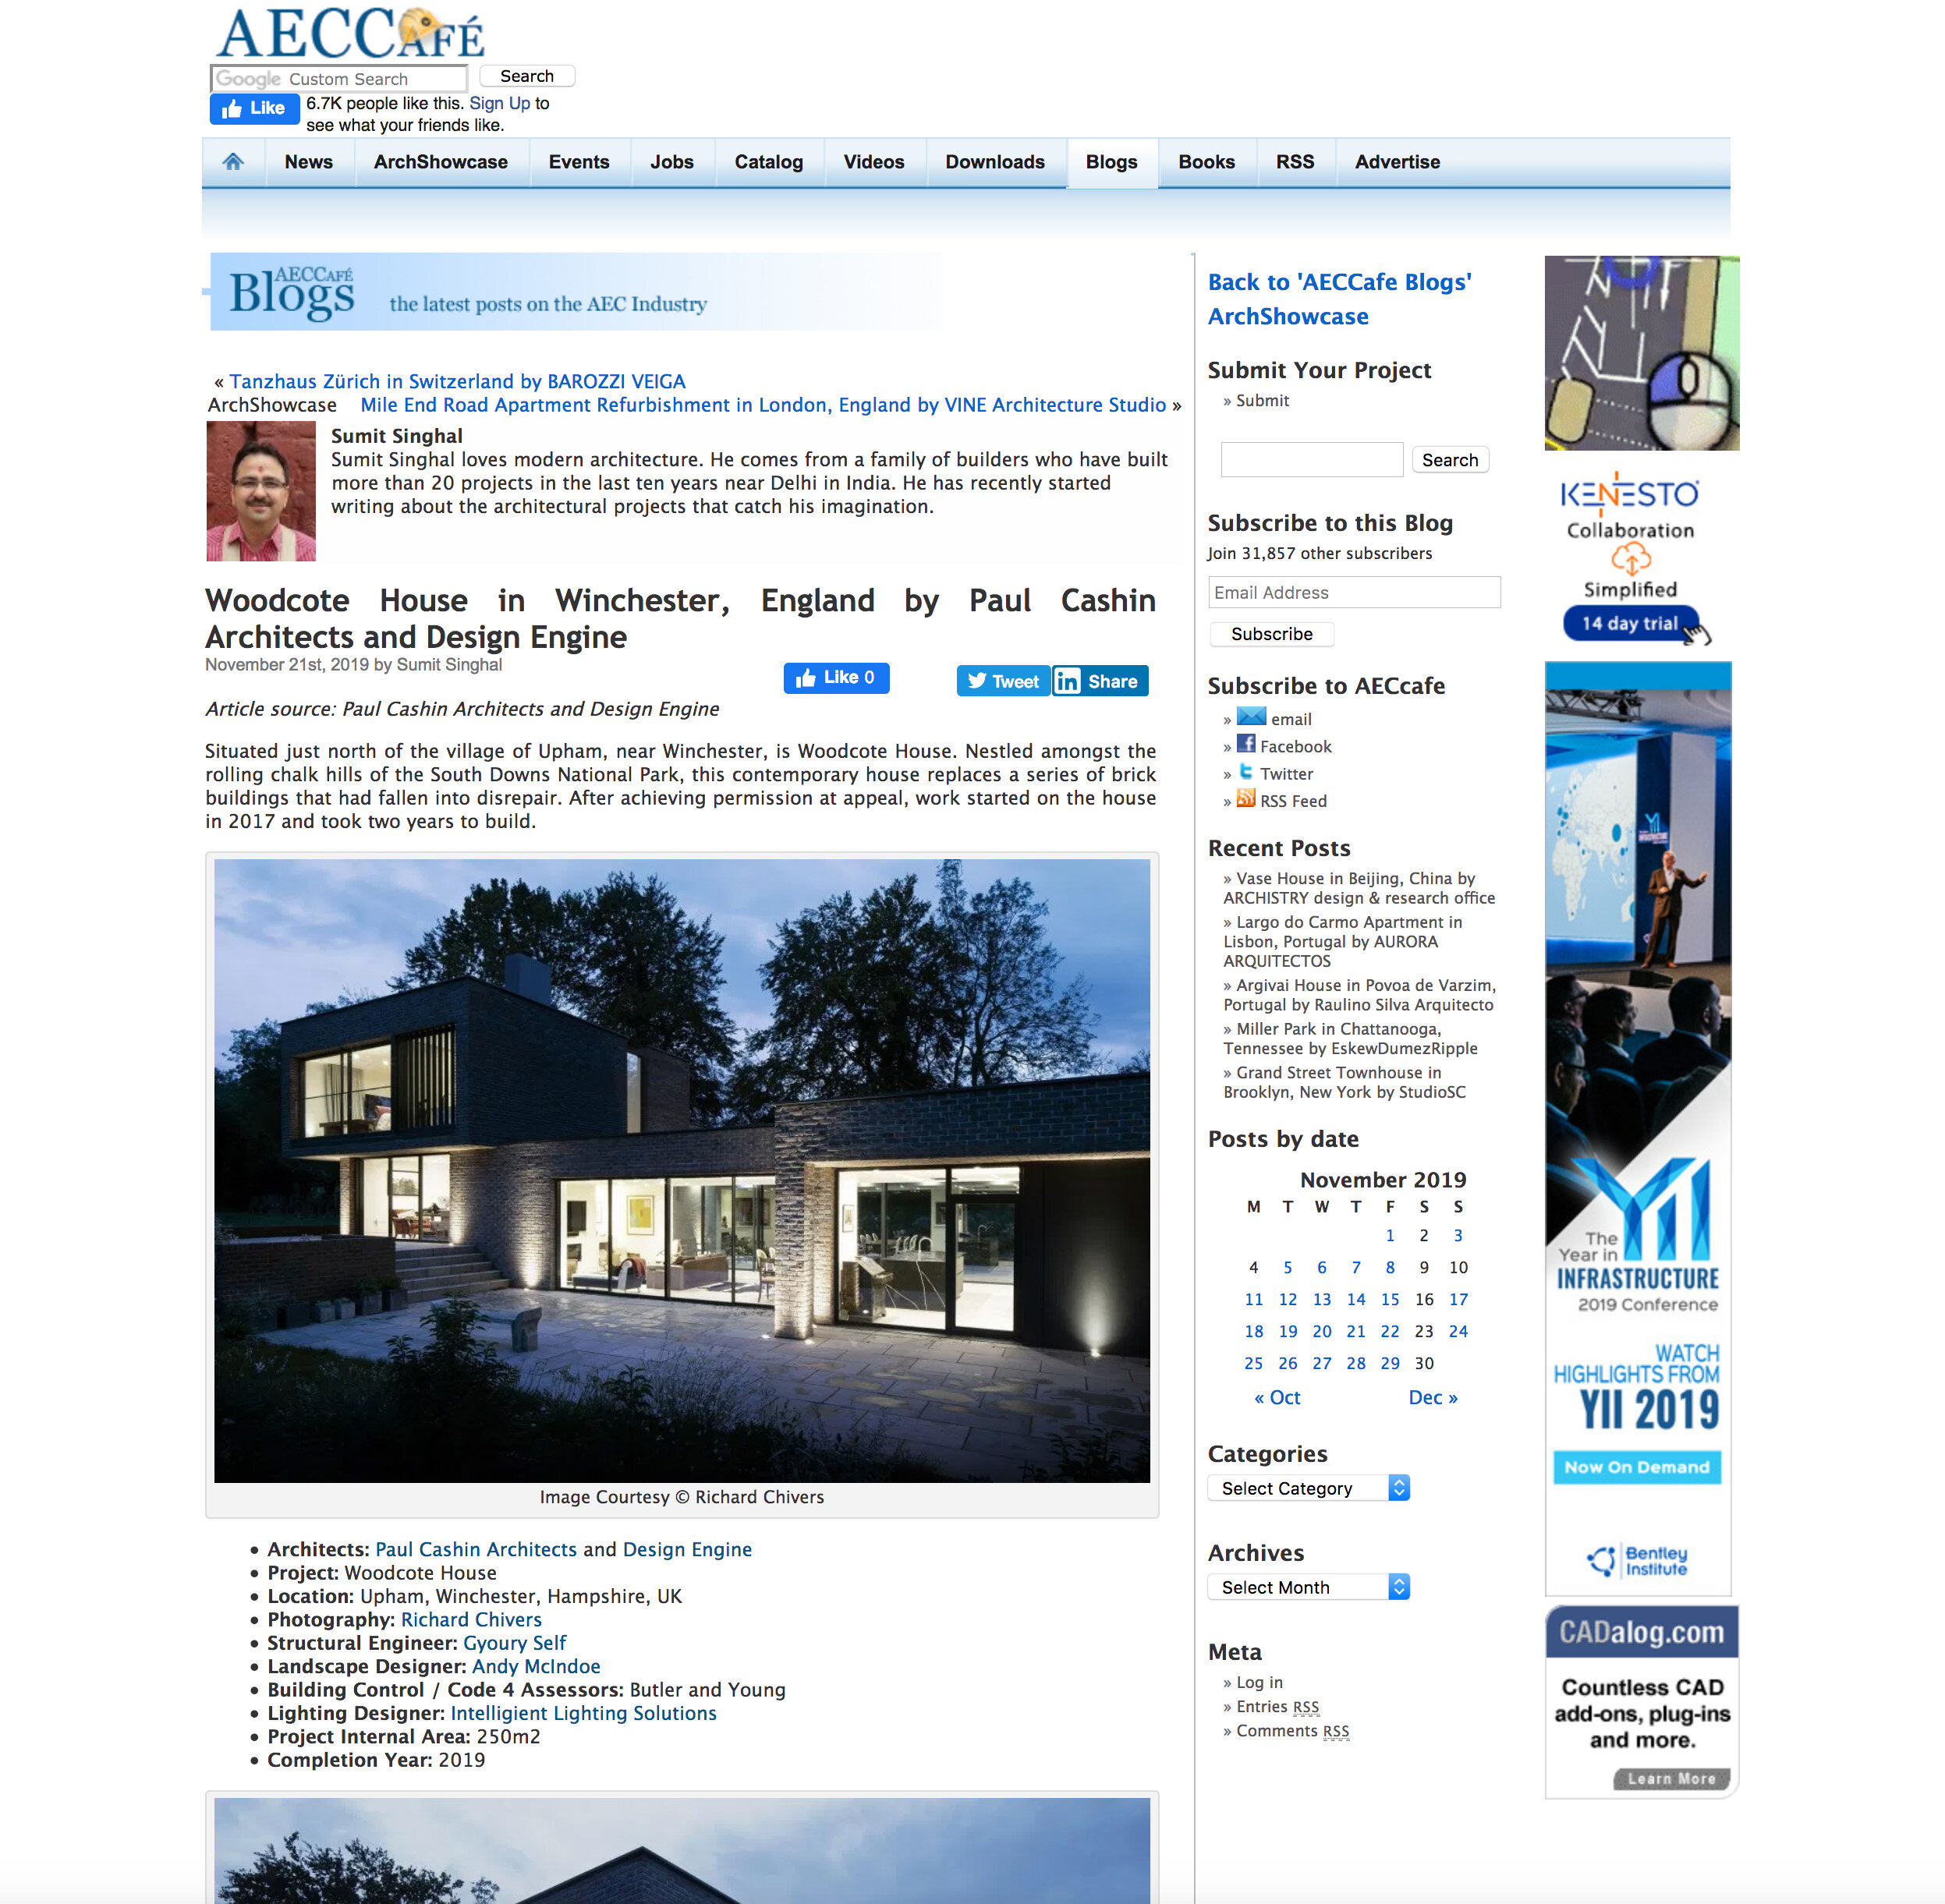 10.19 Woodcote House featured on Aec Cafe